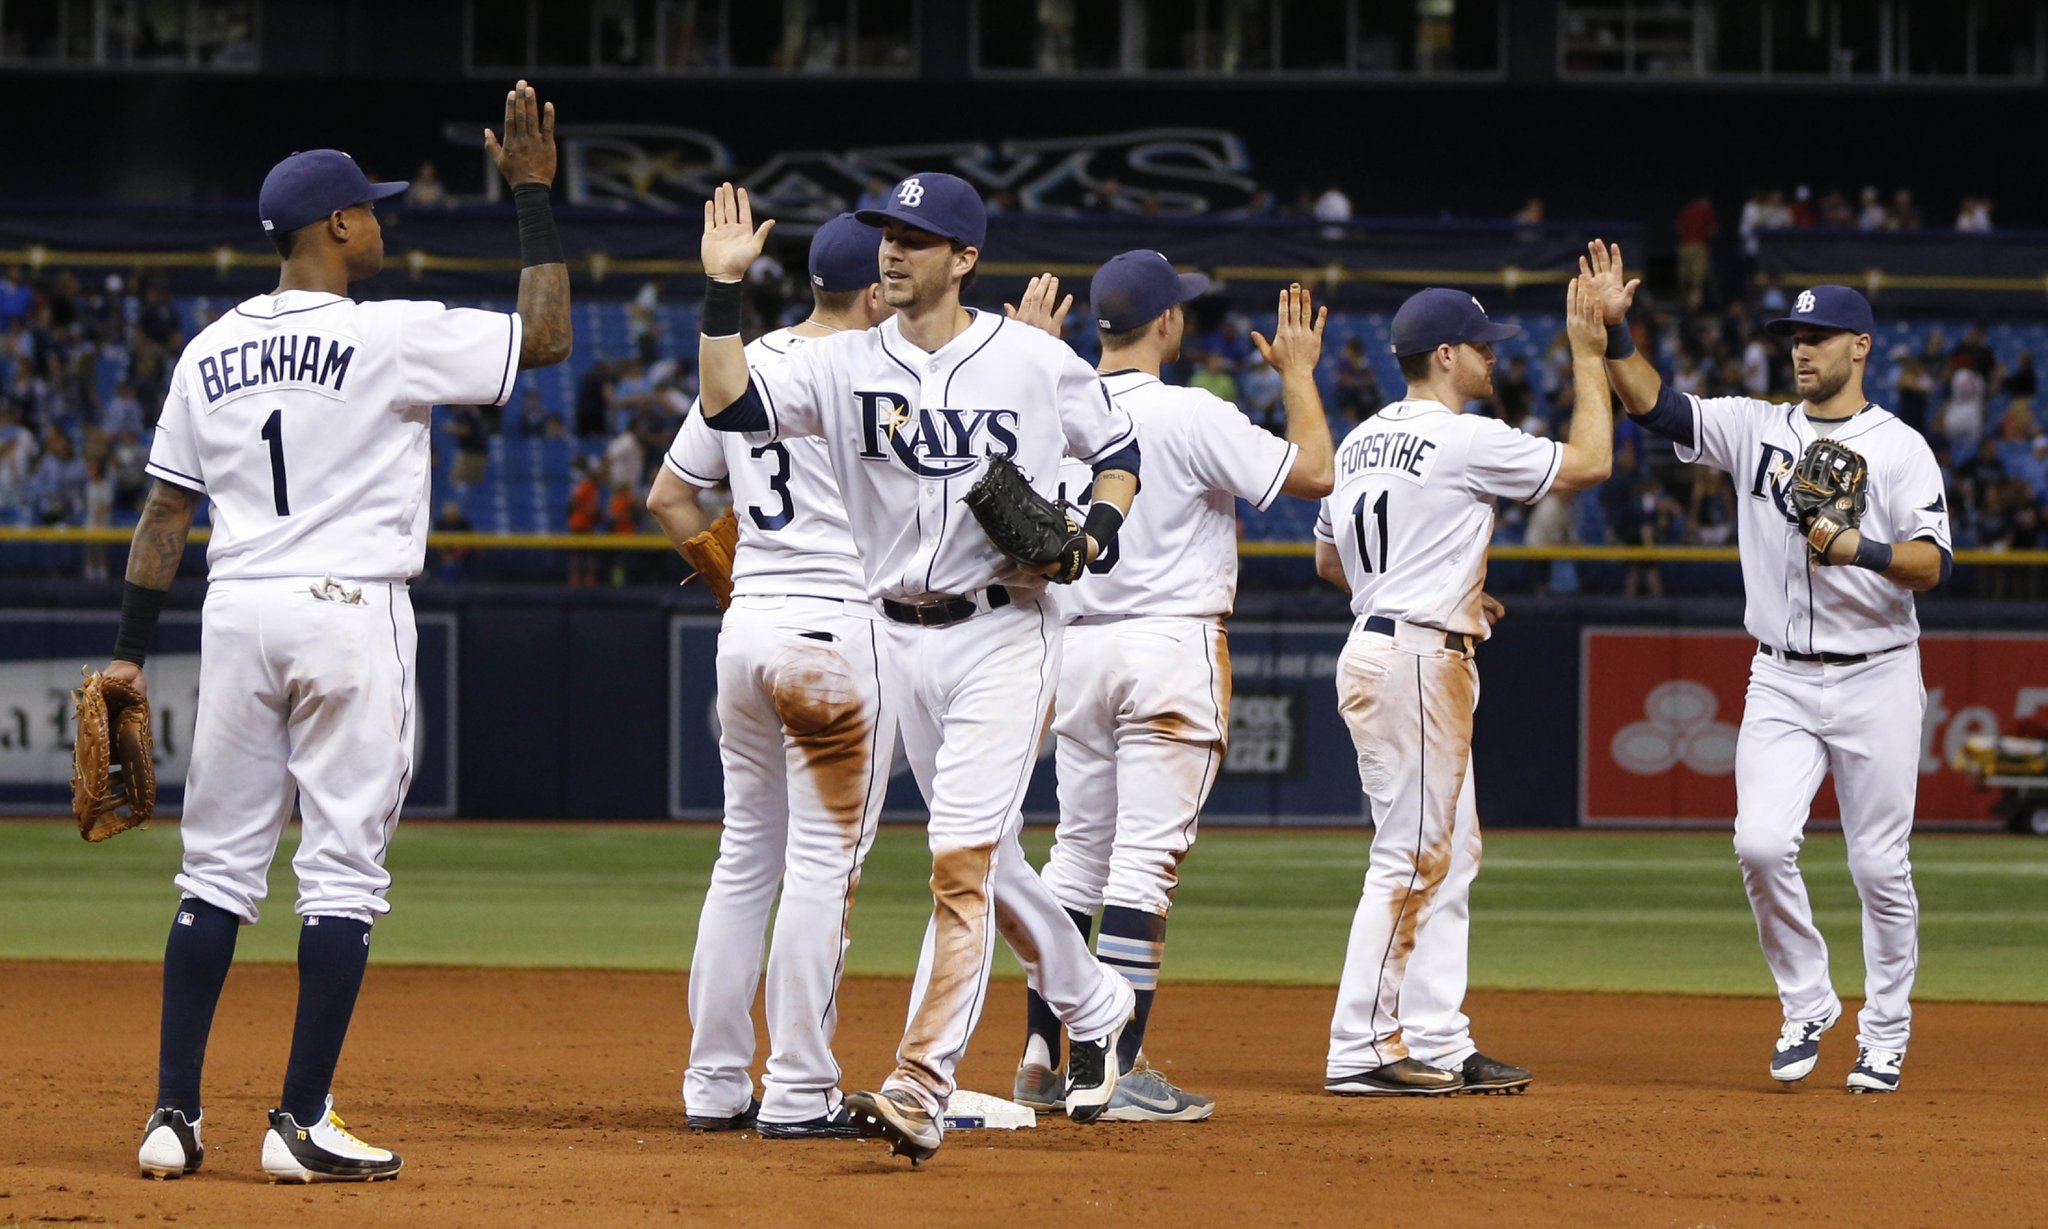 The Tampa Bay Rays improved to 6-3 on the 10-game homestand, and clinched their first winning homestand of the season. (Photo Credit: Tampa Bay Rays)